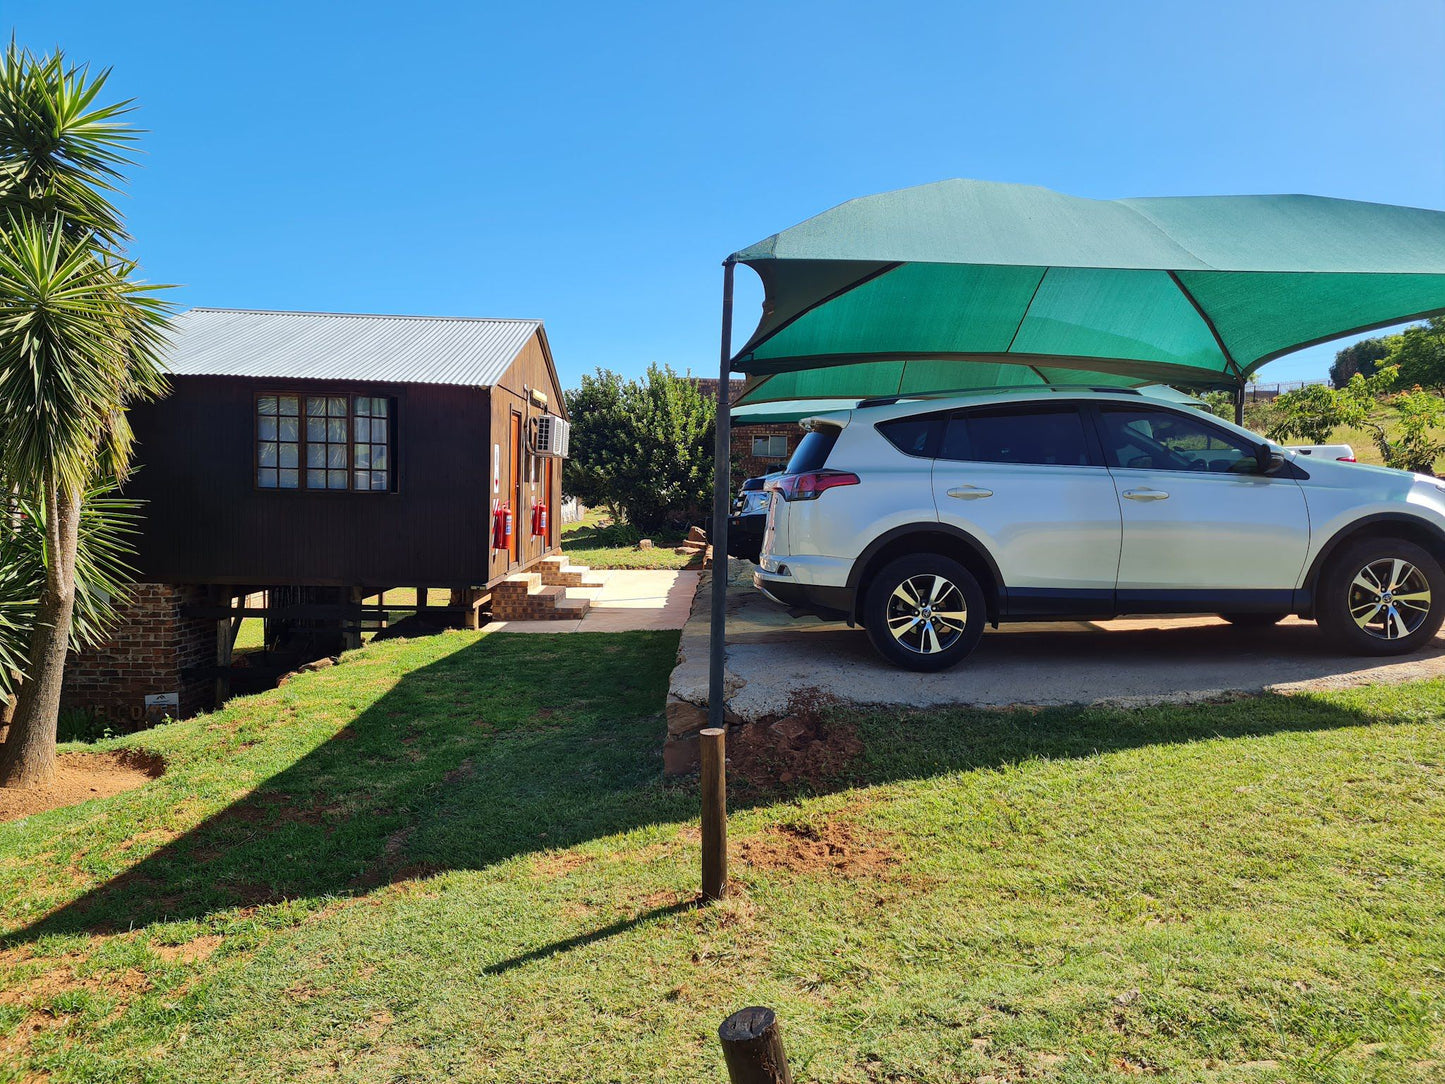 Naauwpoort Lodge Lydenburg Mpumalanga South Africa Complementary Colors, Vehicle, Car